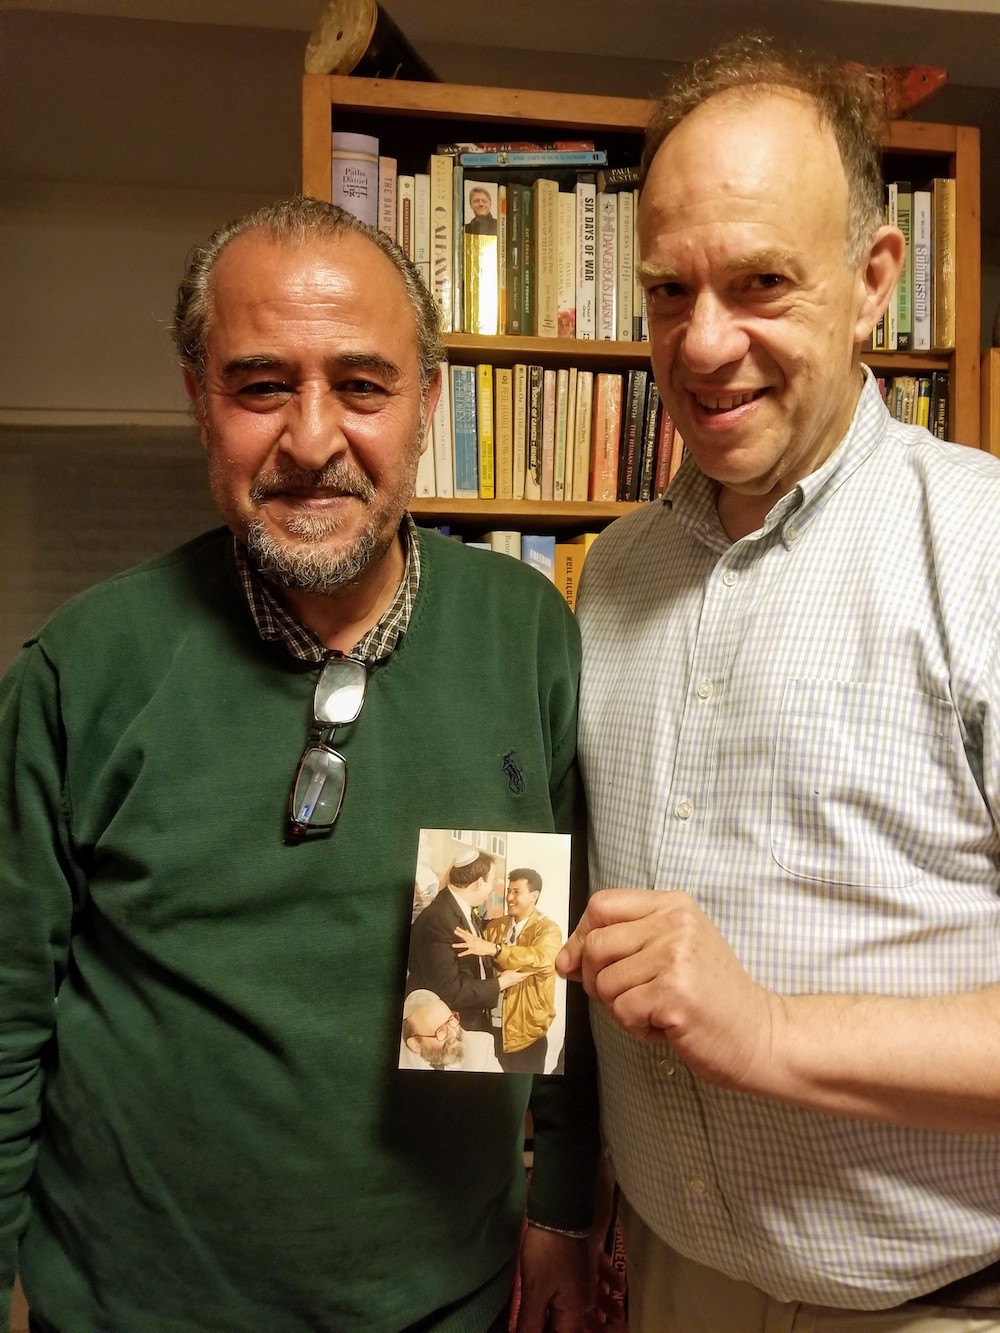 Two journalists—Saud, a native of Gaza City, and Jonathan, a Jewish New Yorker who moved to Israel—and their decades-long friendship forged by covering conflict are the subject of an episode of "The Branch" podcast